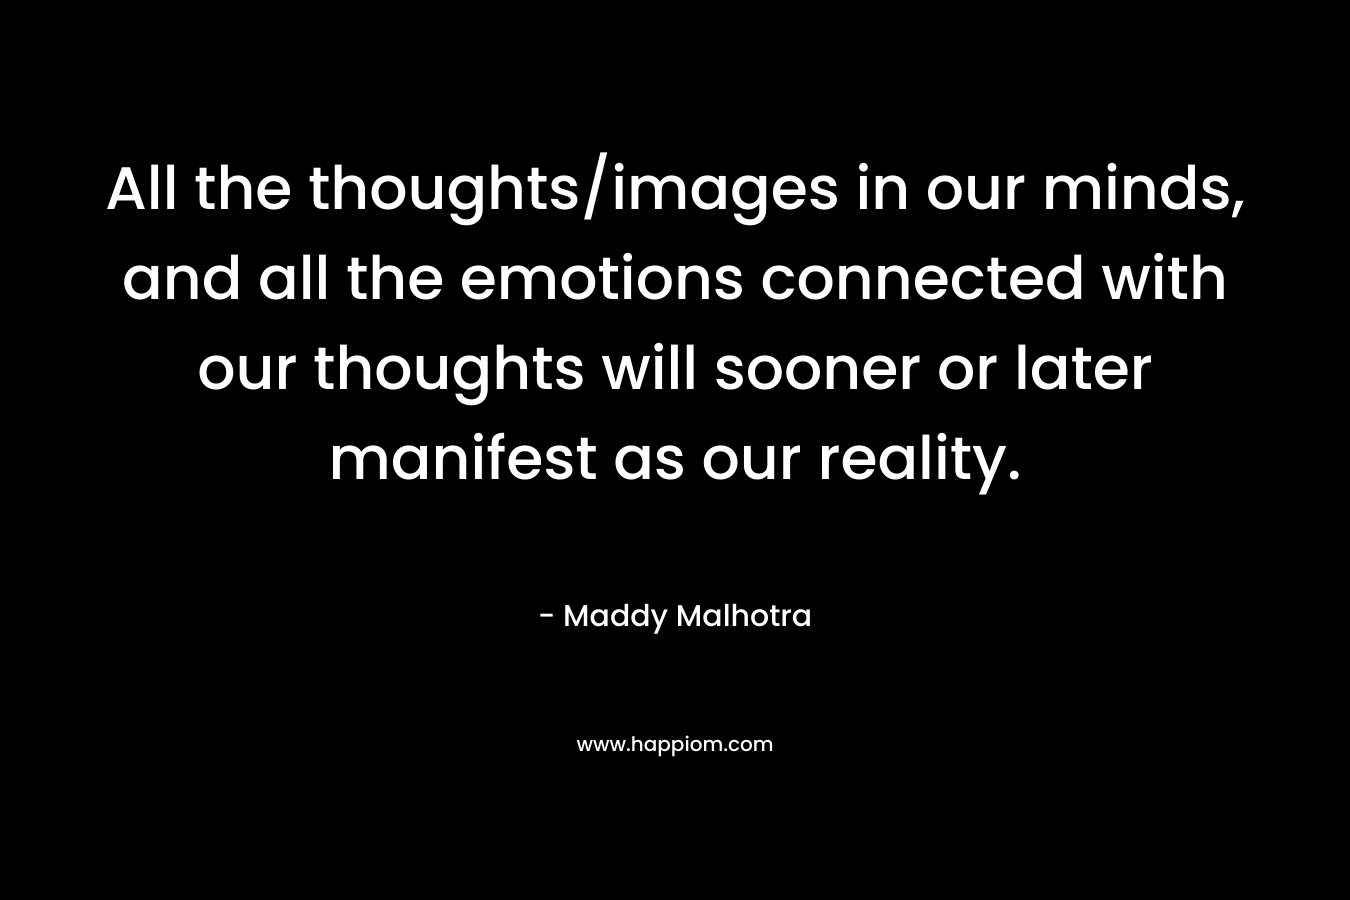 All the thoughts/images in our minds, and all the emotions connected with our thoughts will sooner or later manifest as our reality. – Maddy Malhotra